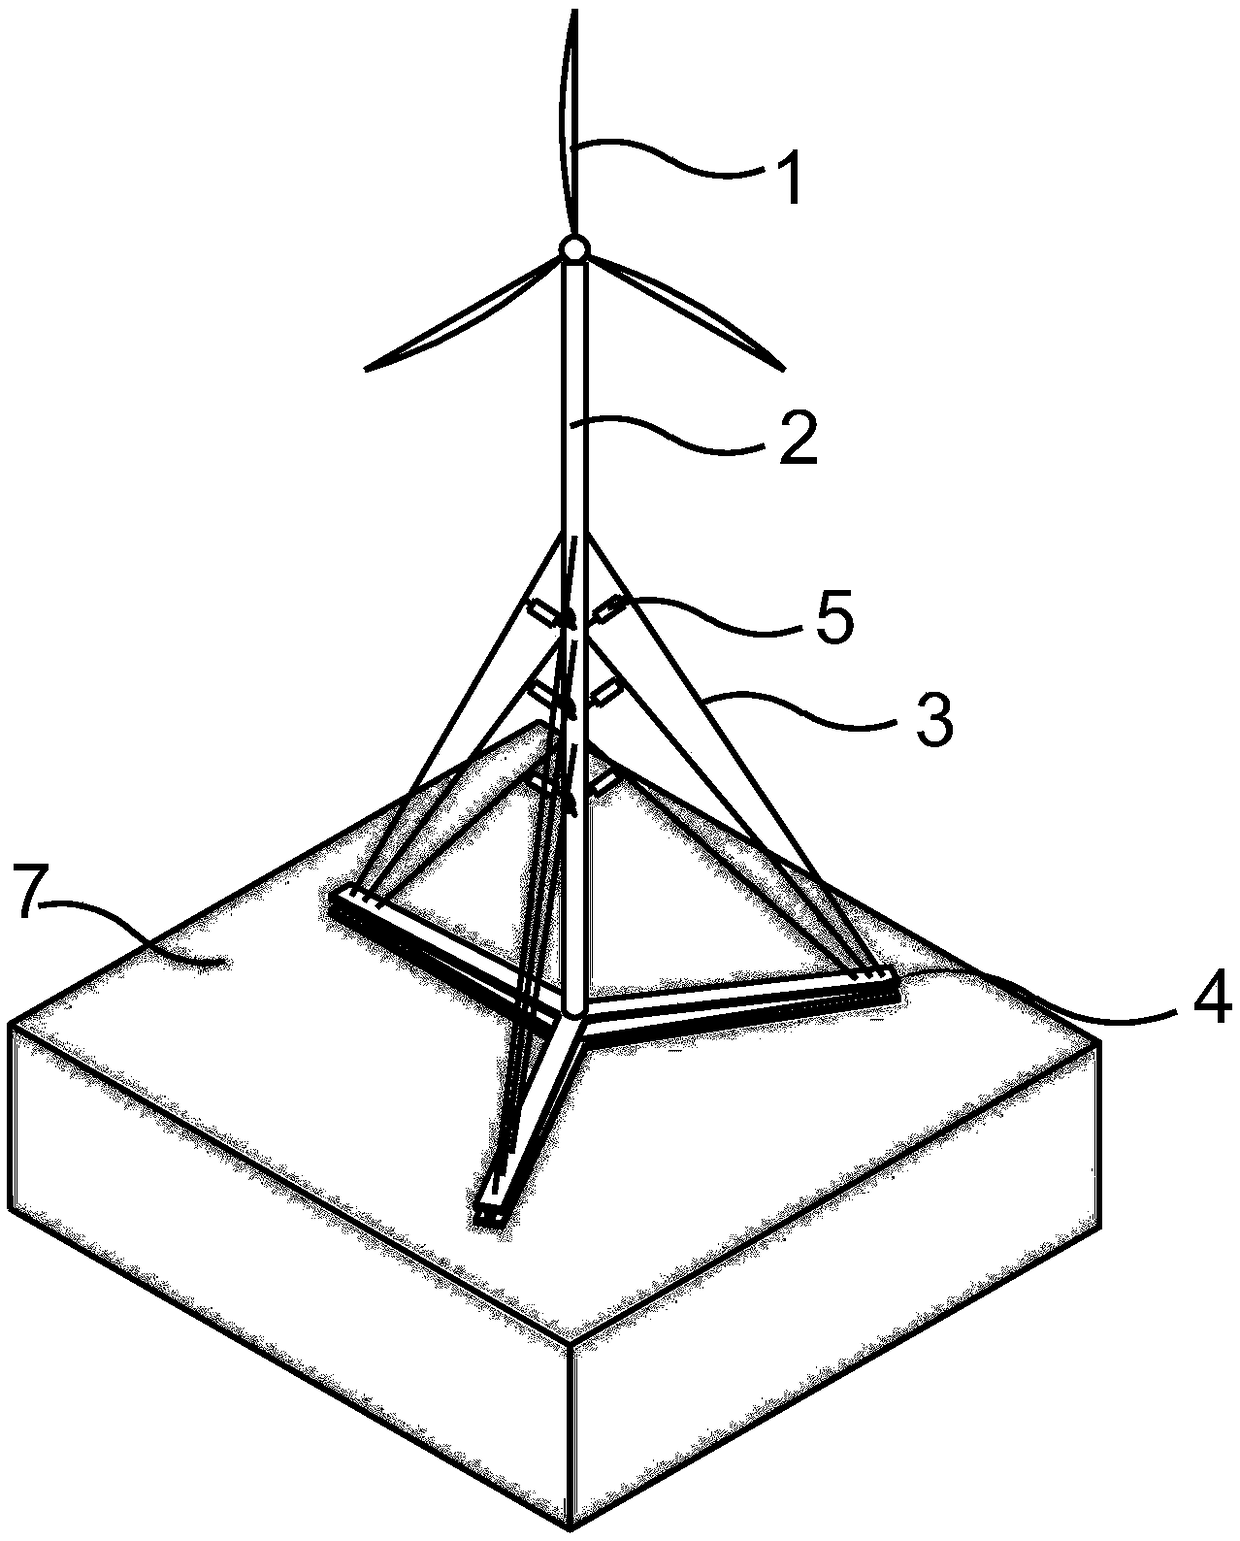 Wind-power tower barrel based on stay cable-steel beam self-balance system